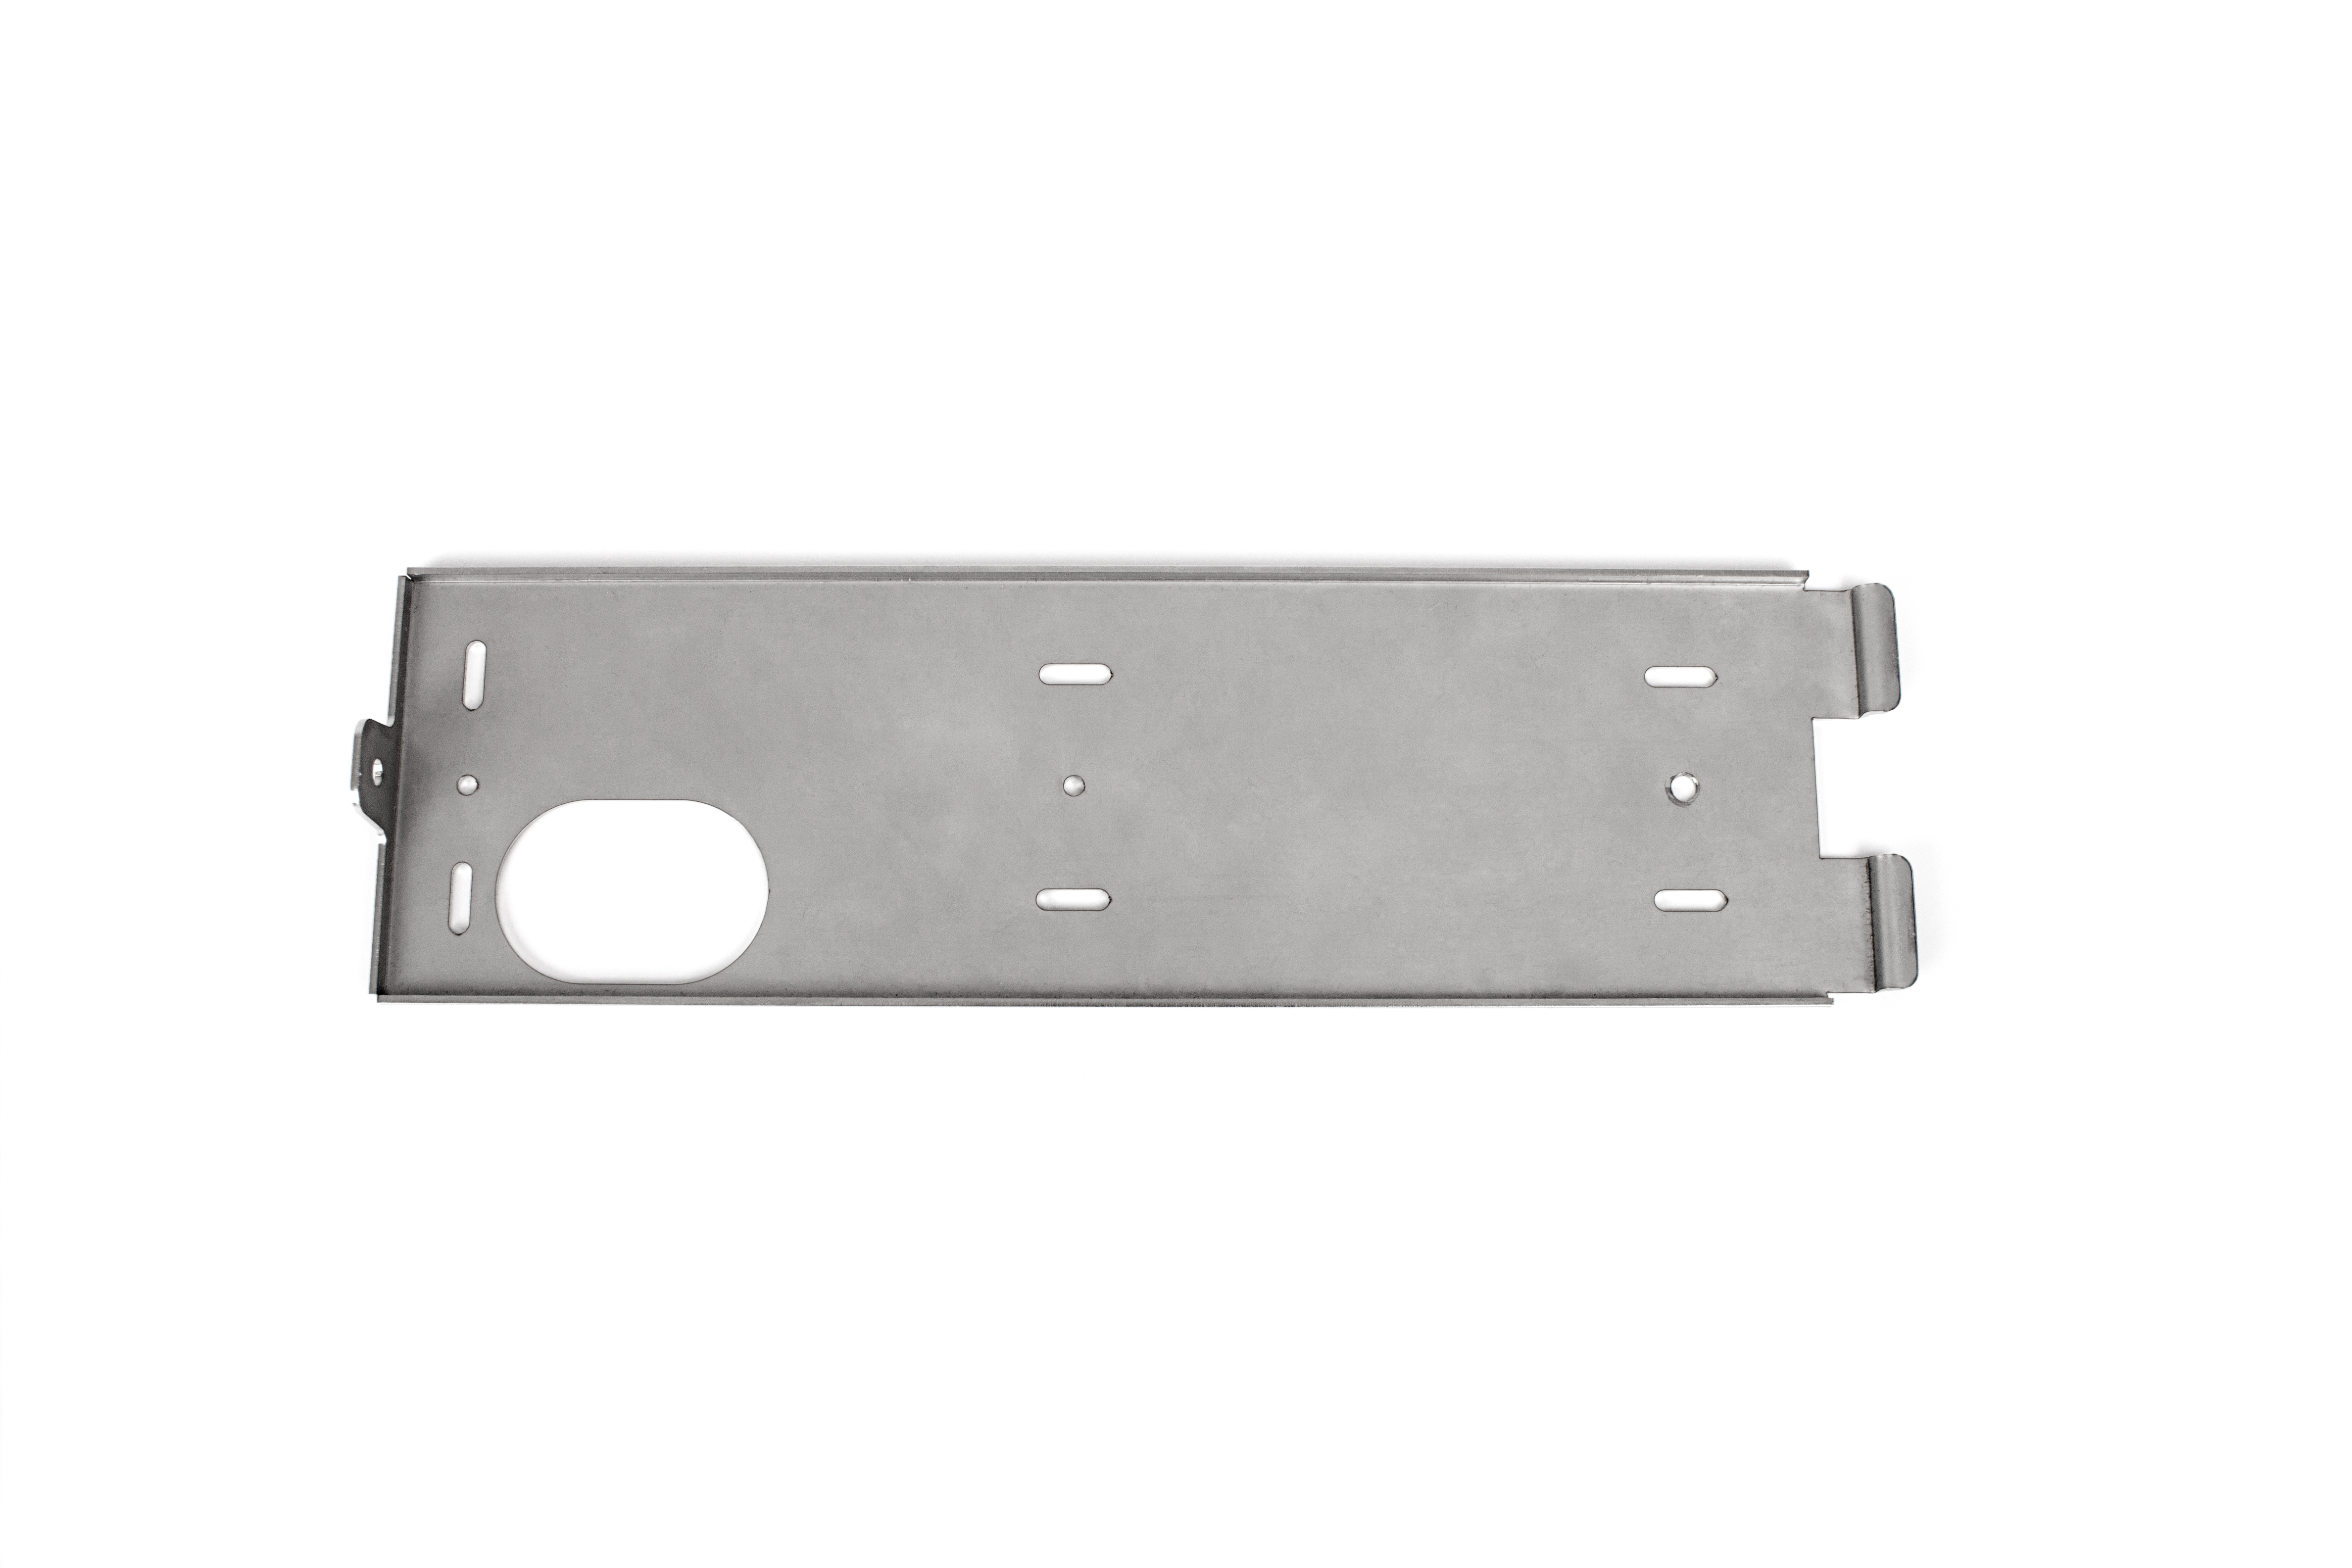 Cable Chase Wire Support Brackets - CC9024